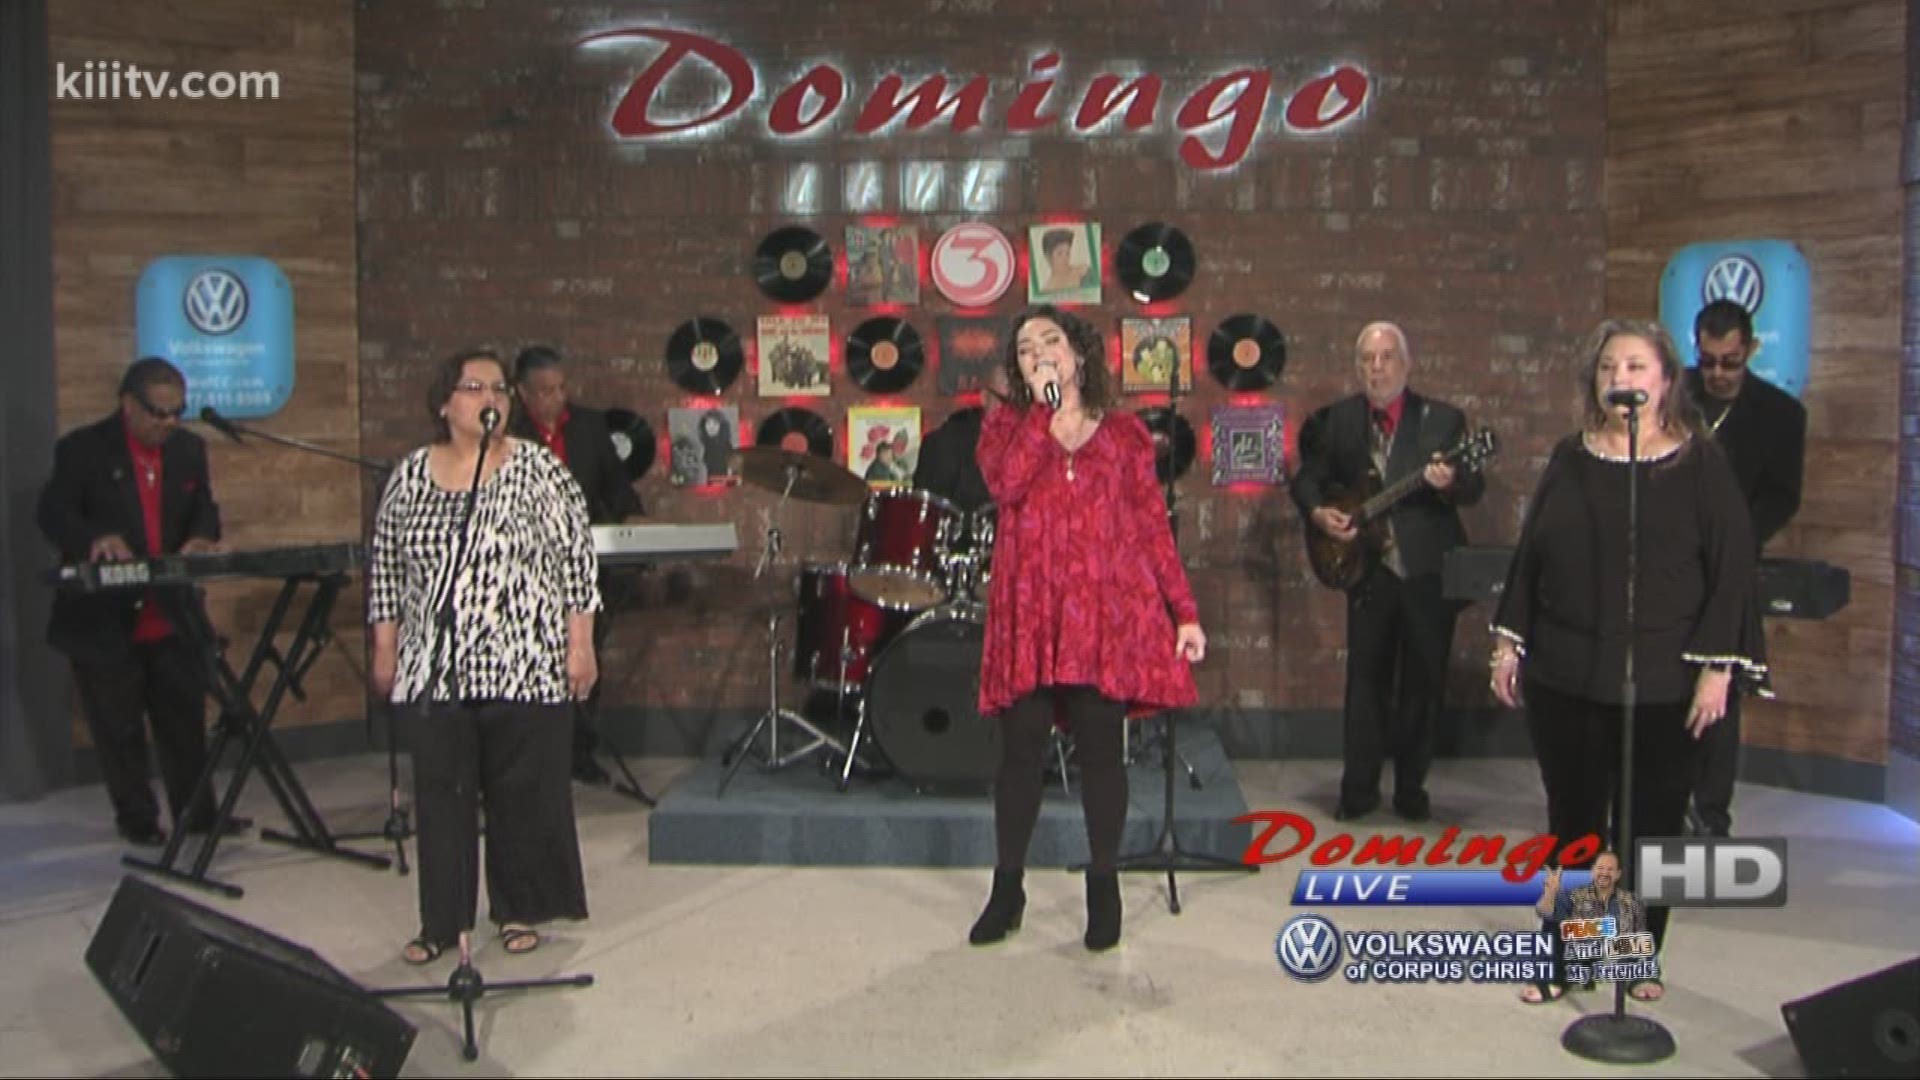 Monique Martinez performing "Mary, Did You Know" on Domingo Live.